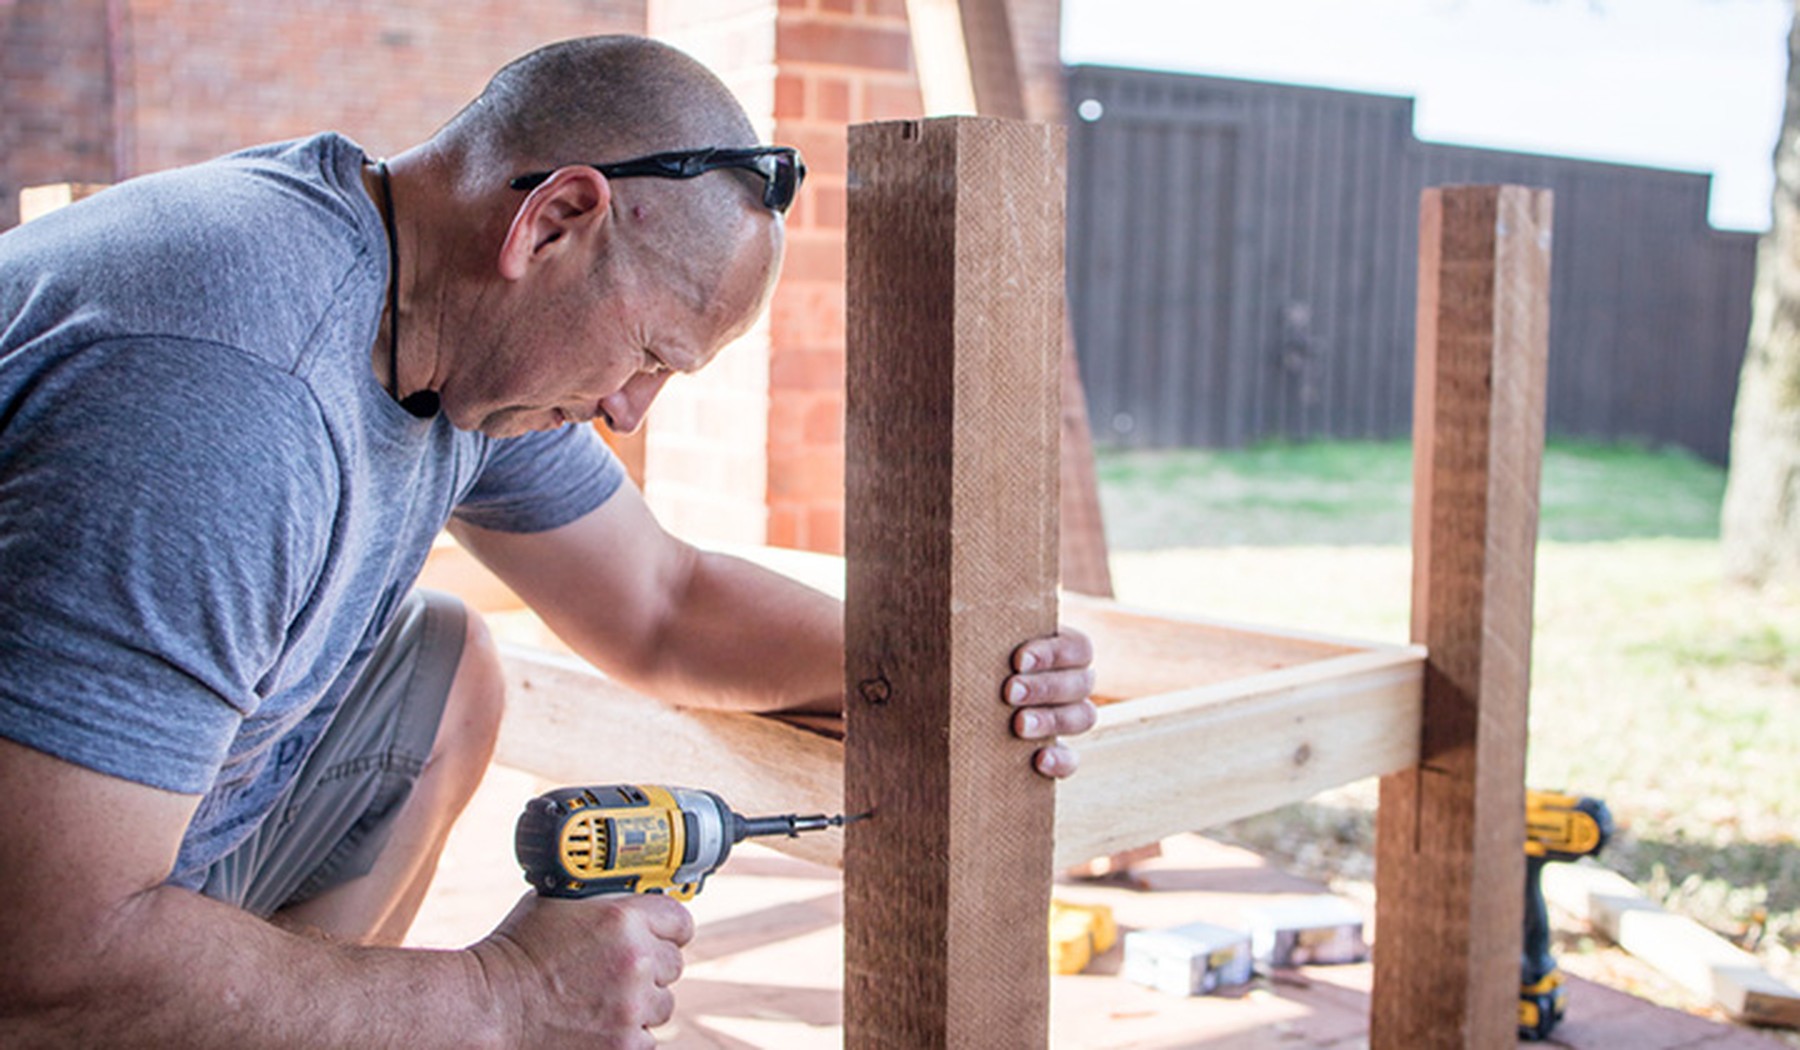 Man using tools to build a deck outside